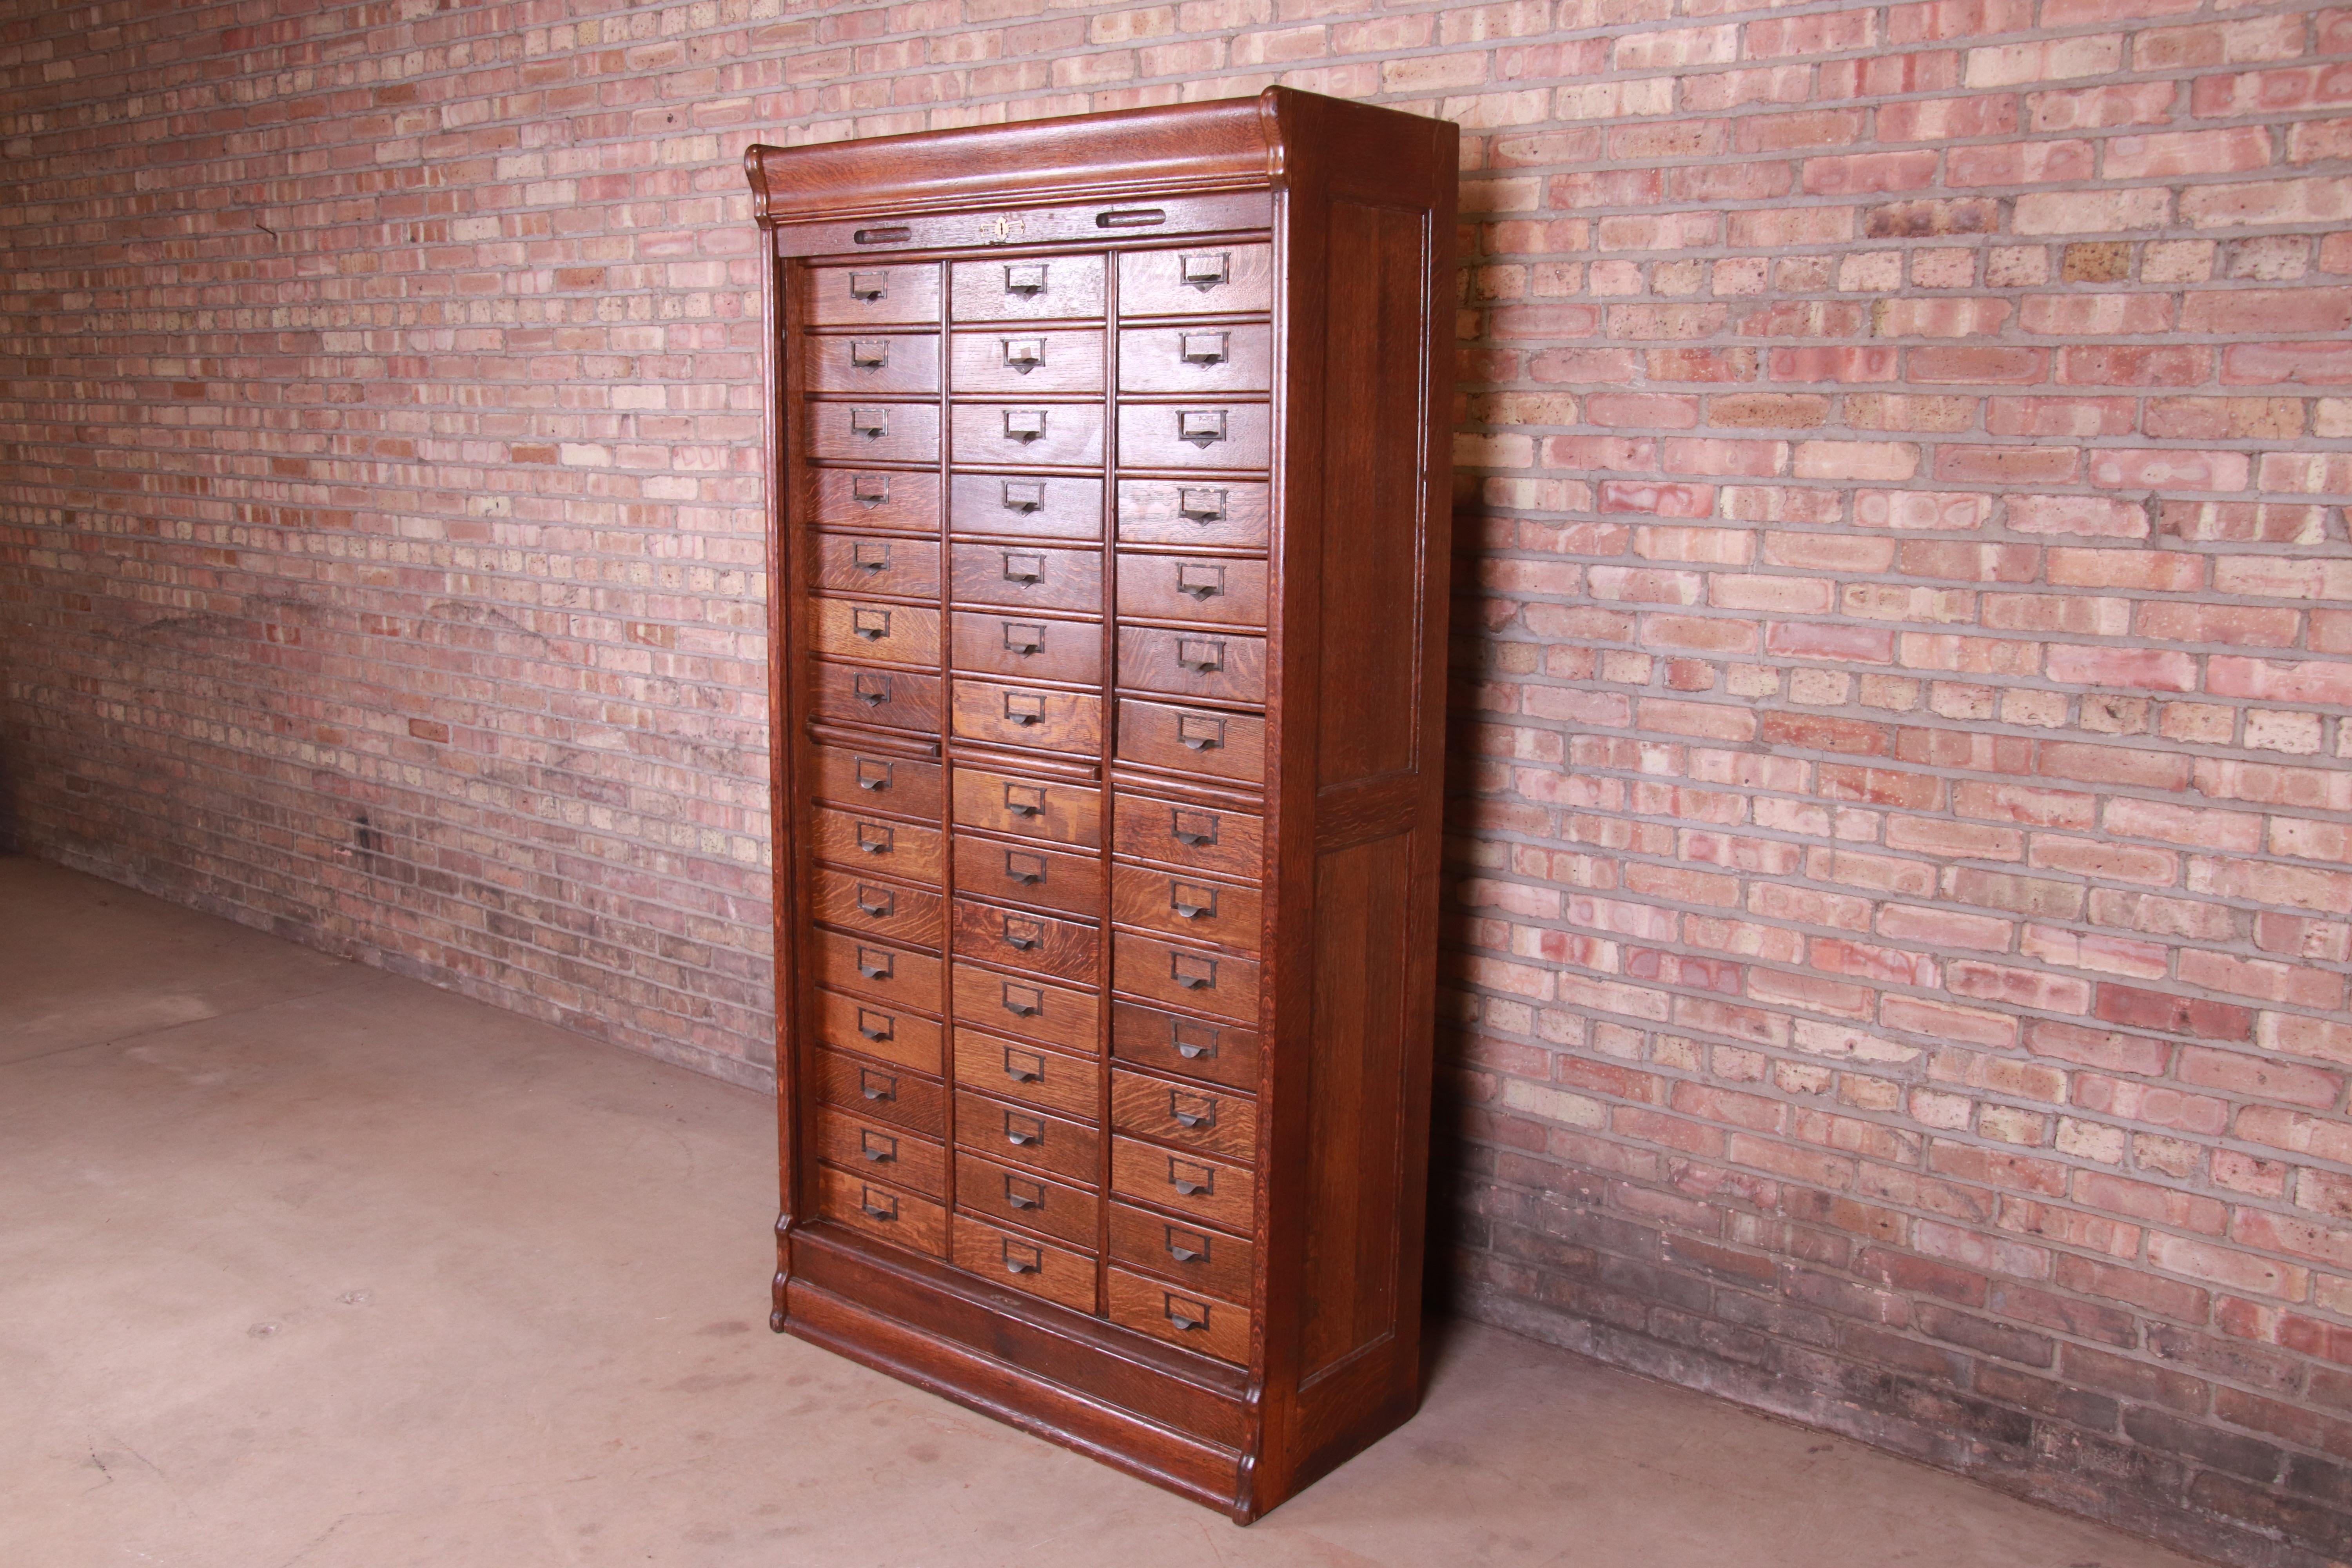 A rare and exceptional antique oak 45-drawer card catalog or file cabinet with roll down tambour door,

USA, circa 1900

Quarter sawn oak, with brass hardware.

Measures: 42